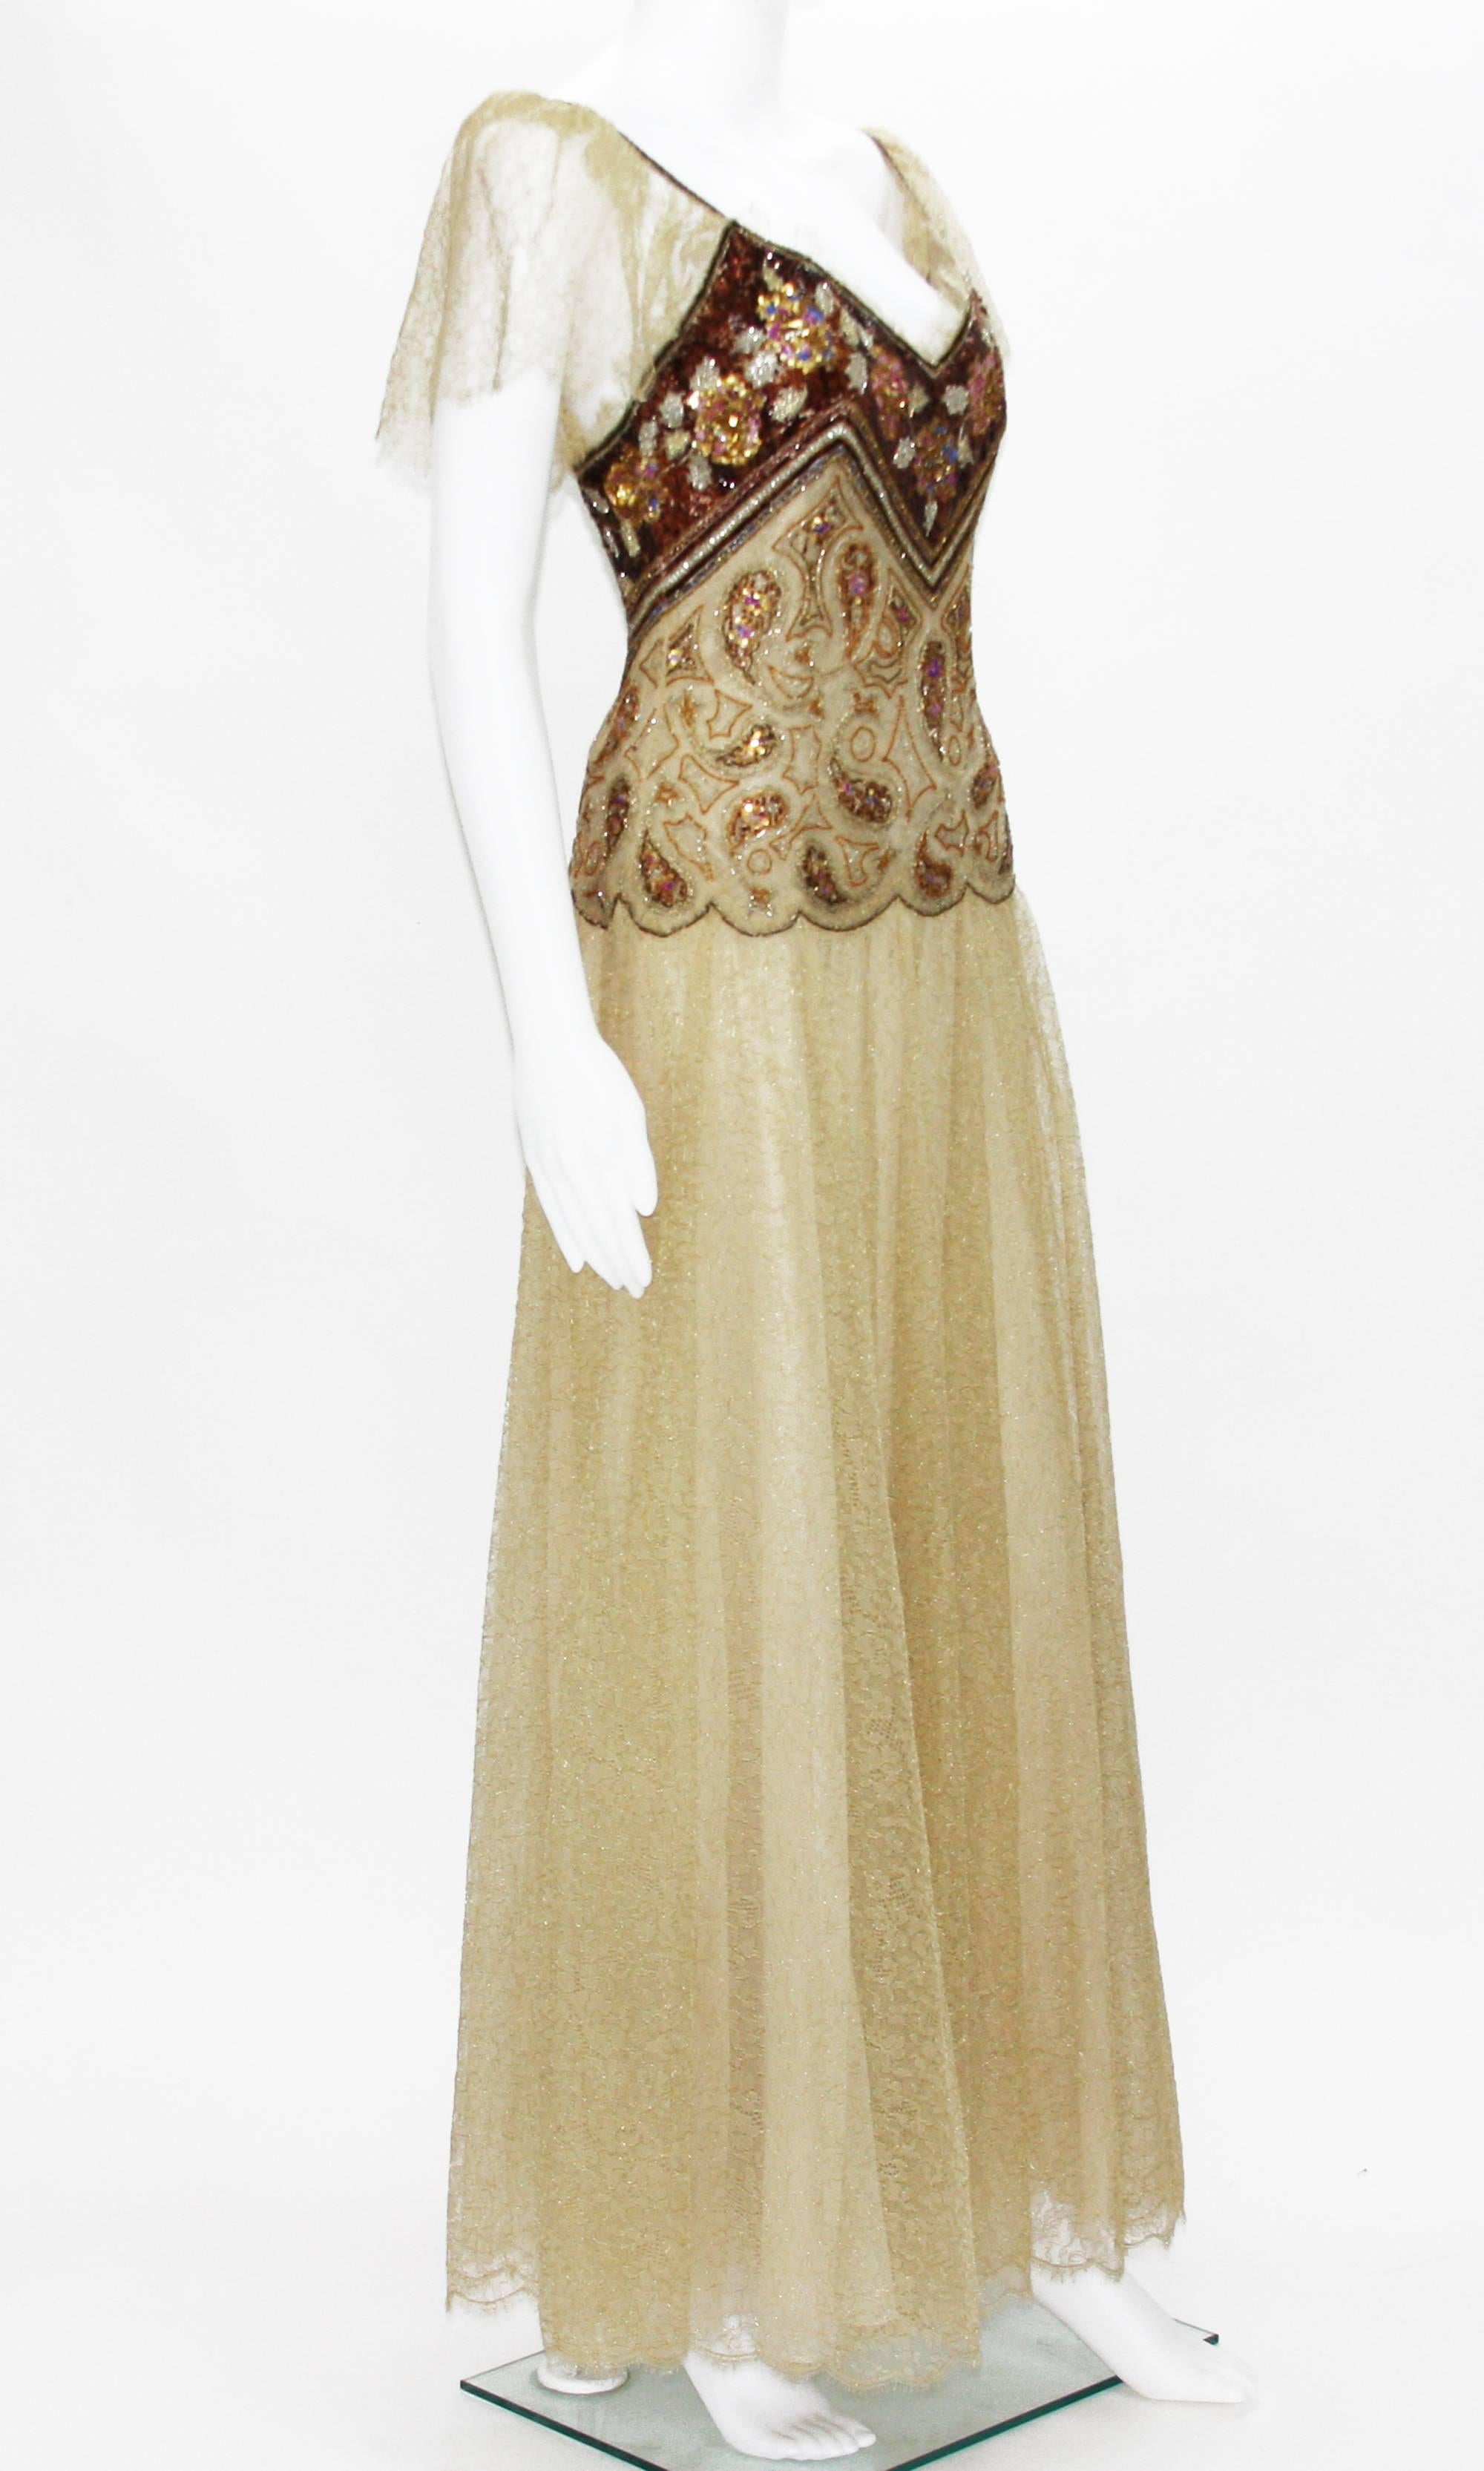 Women's Automne-Hiver 1980 Christian Dior Paris Numbered Lace Gown with Stole